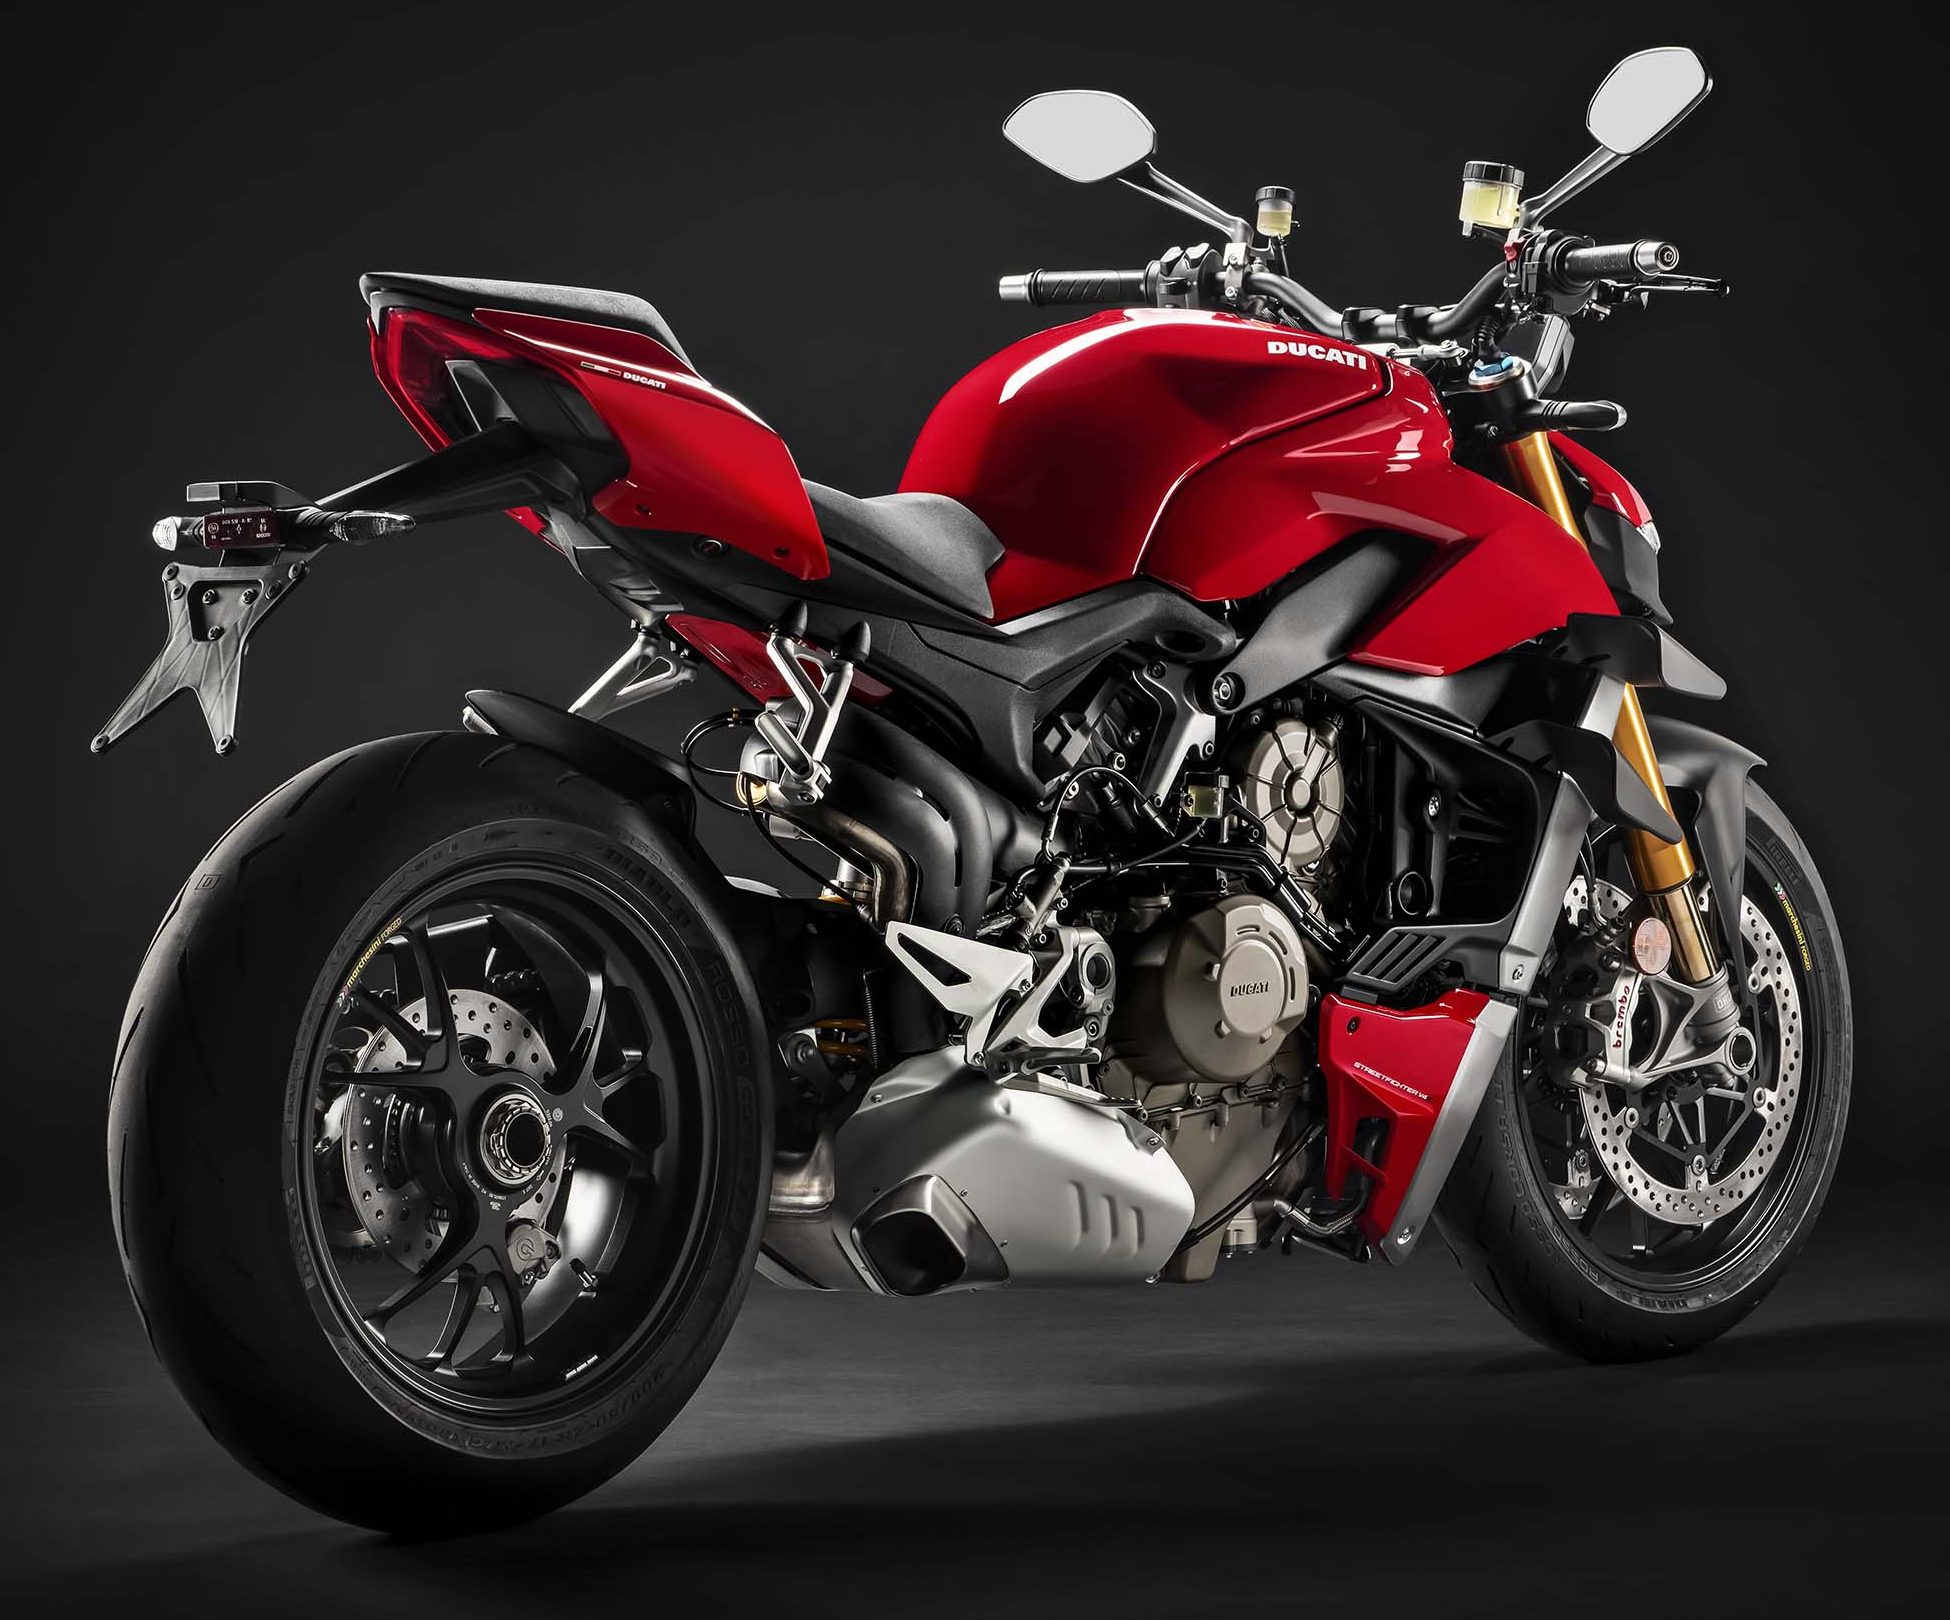 Ducati to Launch 12 New Motorcycles